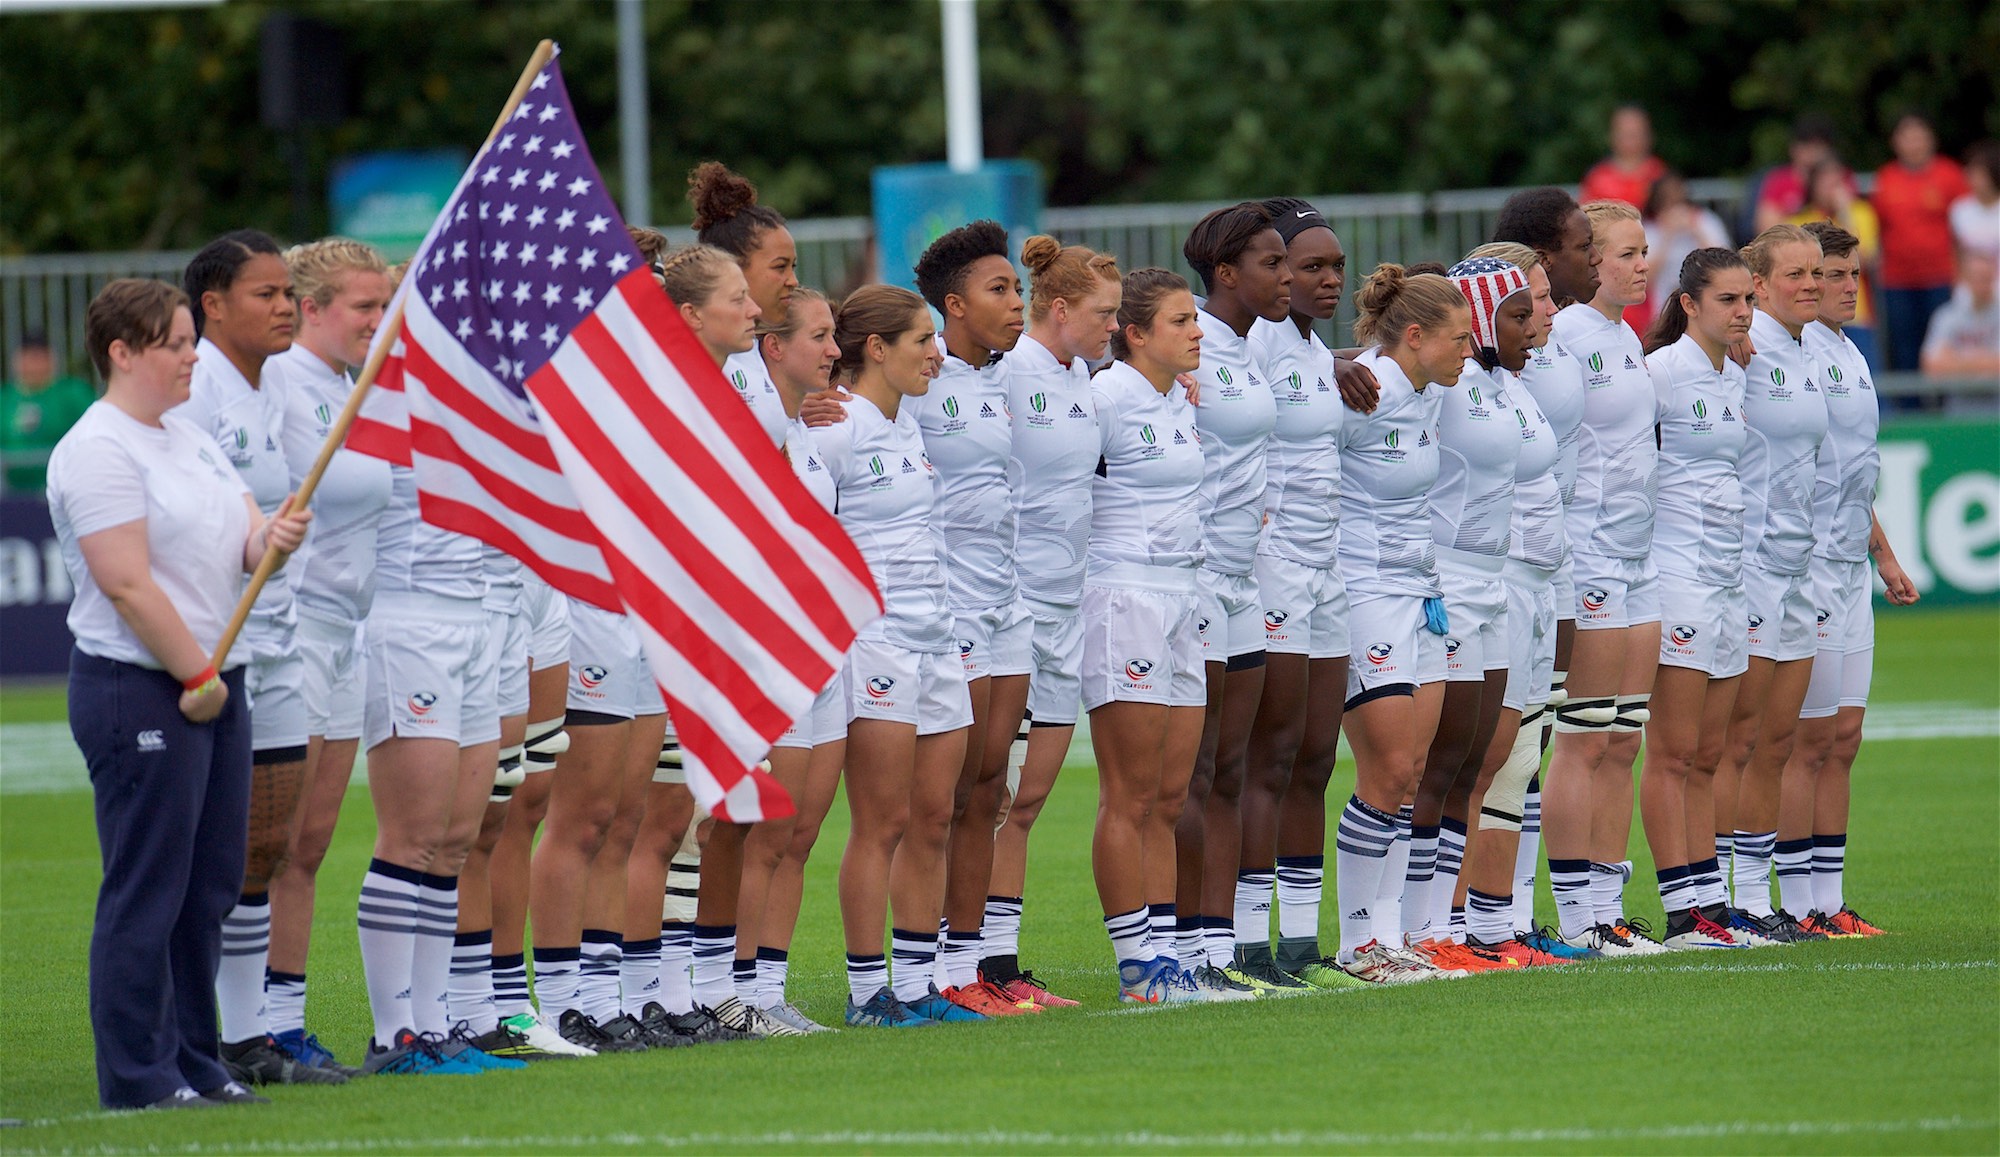 USA against Spain in the 2017 Women's Rugby World Cup. Ian Muir photo for FloRugby.